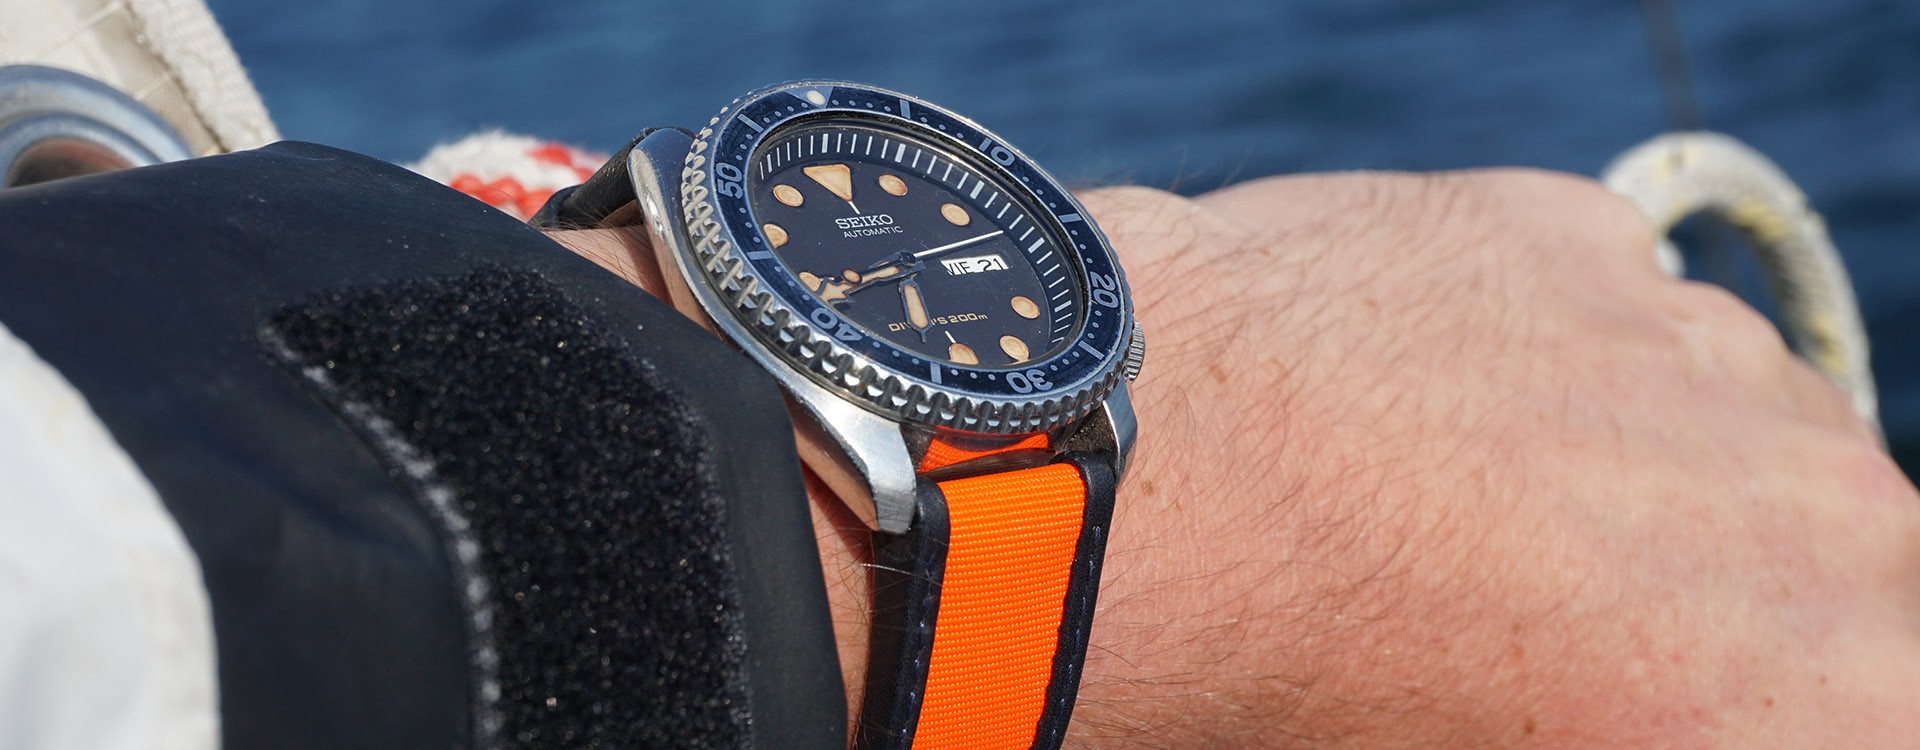 Sailcloth watch strap: the technicality of sailing, the comfort of leather